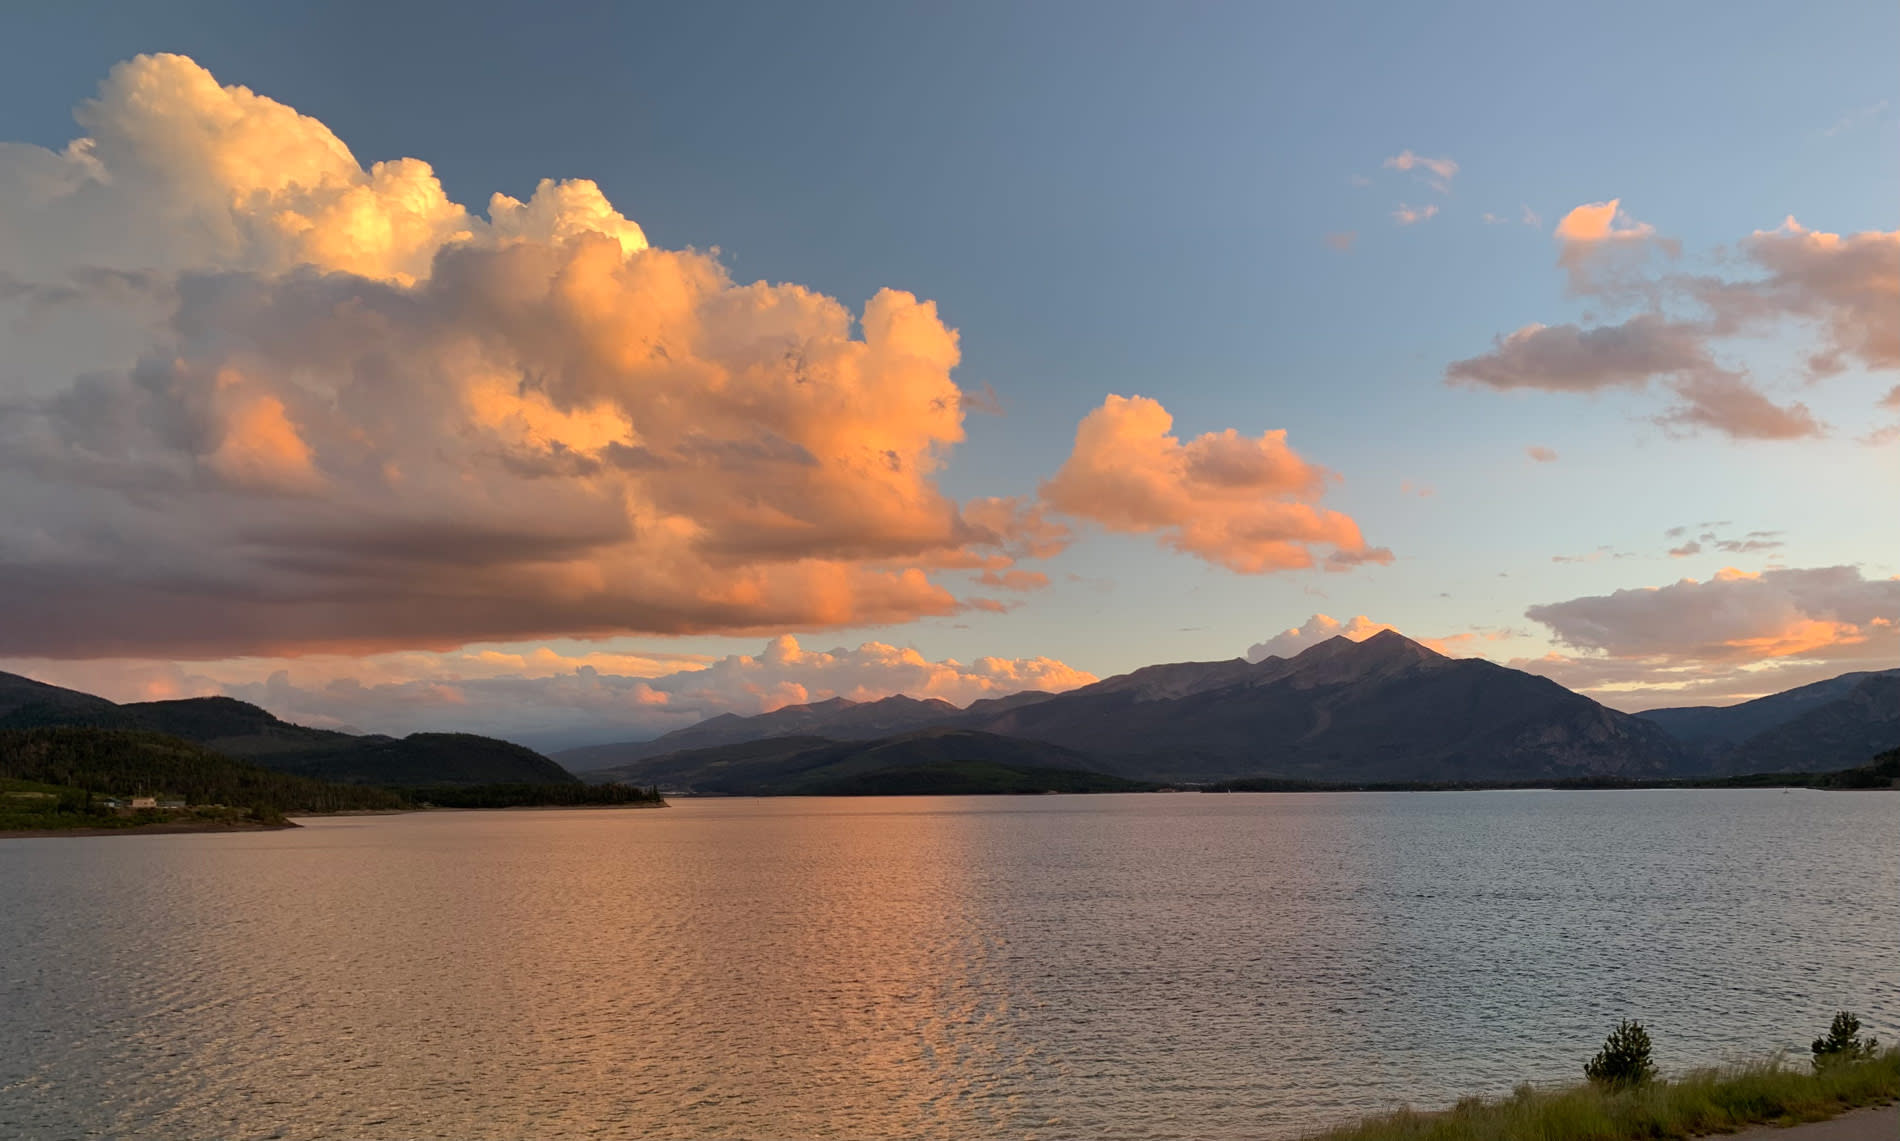 Top Denver Summer Getaways and Places to See - Dillon Reservoir in Keystone